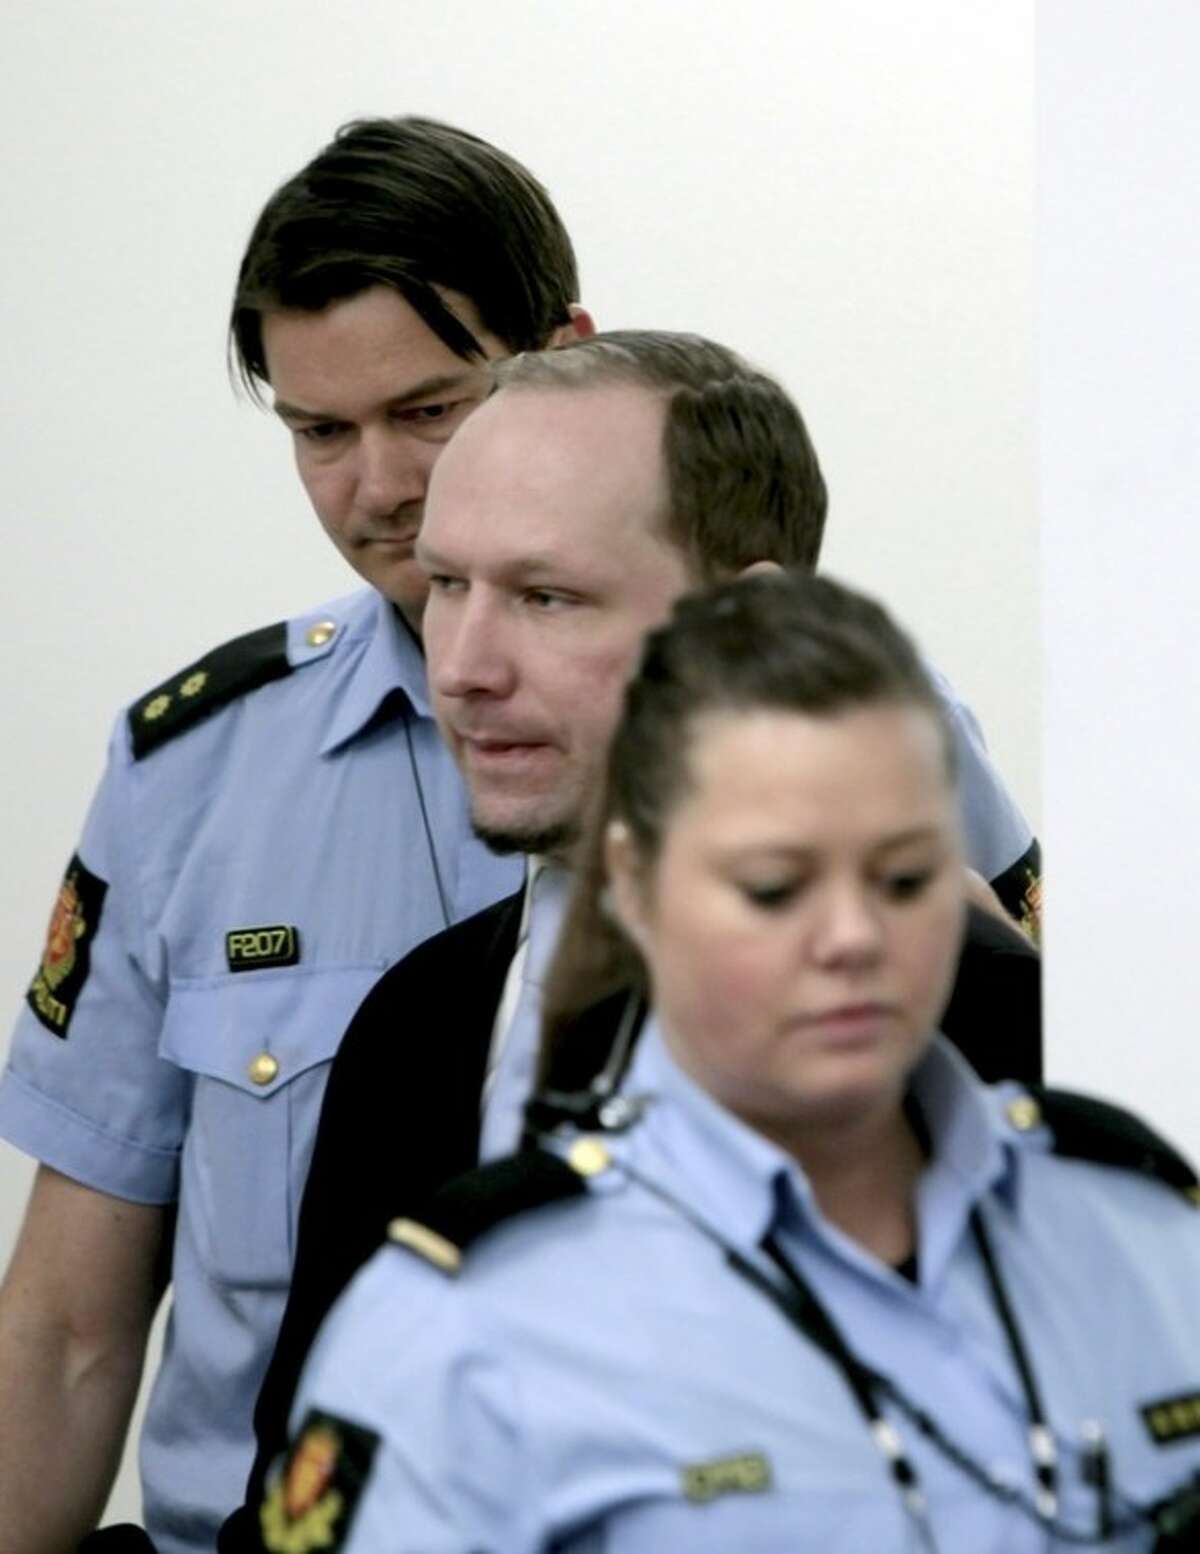 Anders Behring Breivik between 2 police officers prior to taking his seat after a break in the courtroom in Oslo Tuesday morning May 15, 2012. When the trial opened, the self-styled anti-Muslim crusader pleaded innocent to terror charges _ even though he admitted to the facts of the case _ saying he didn't recognize the authority of the court. (AP Photo/Stian Lysberg Solum, Pool)